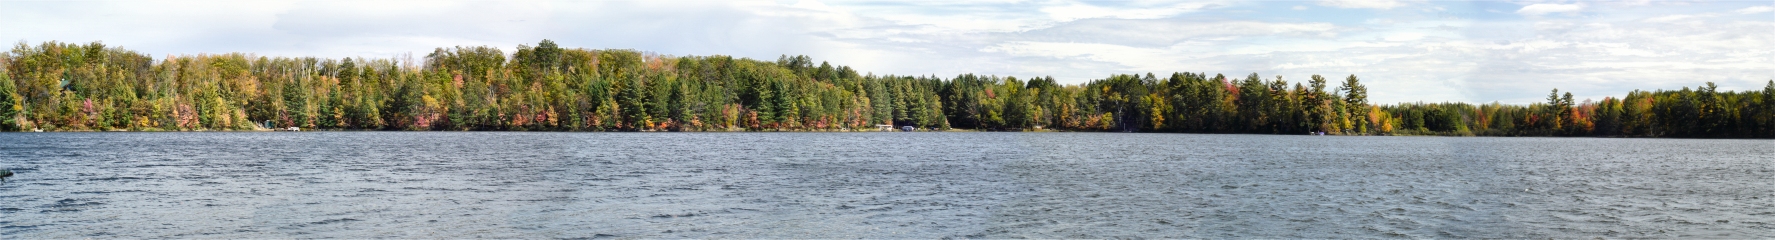 A panoramic view of Garrett's Landing from a boat on Tom Doyle Lake